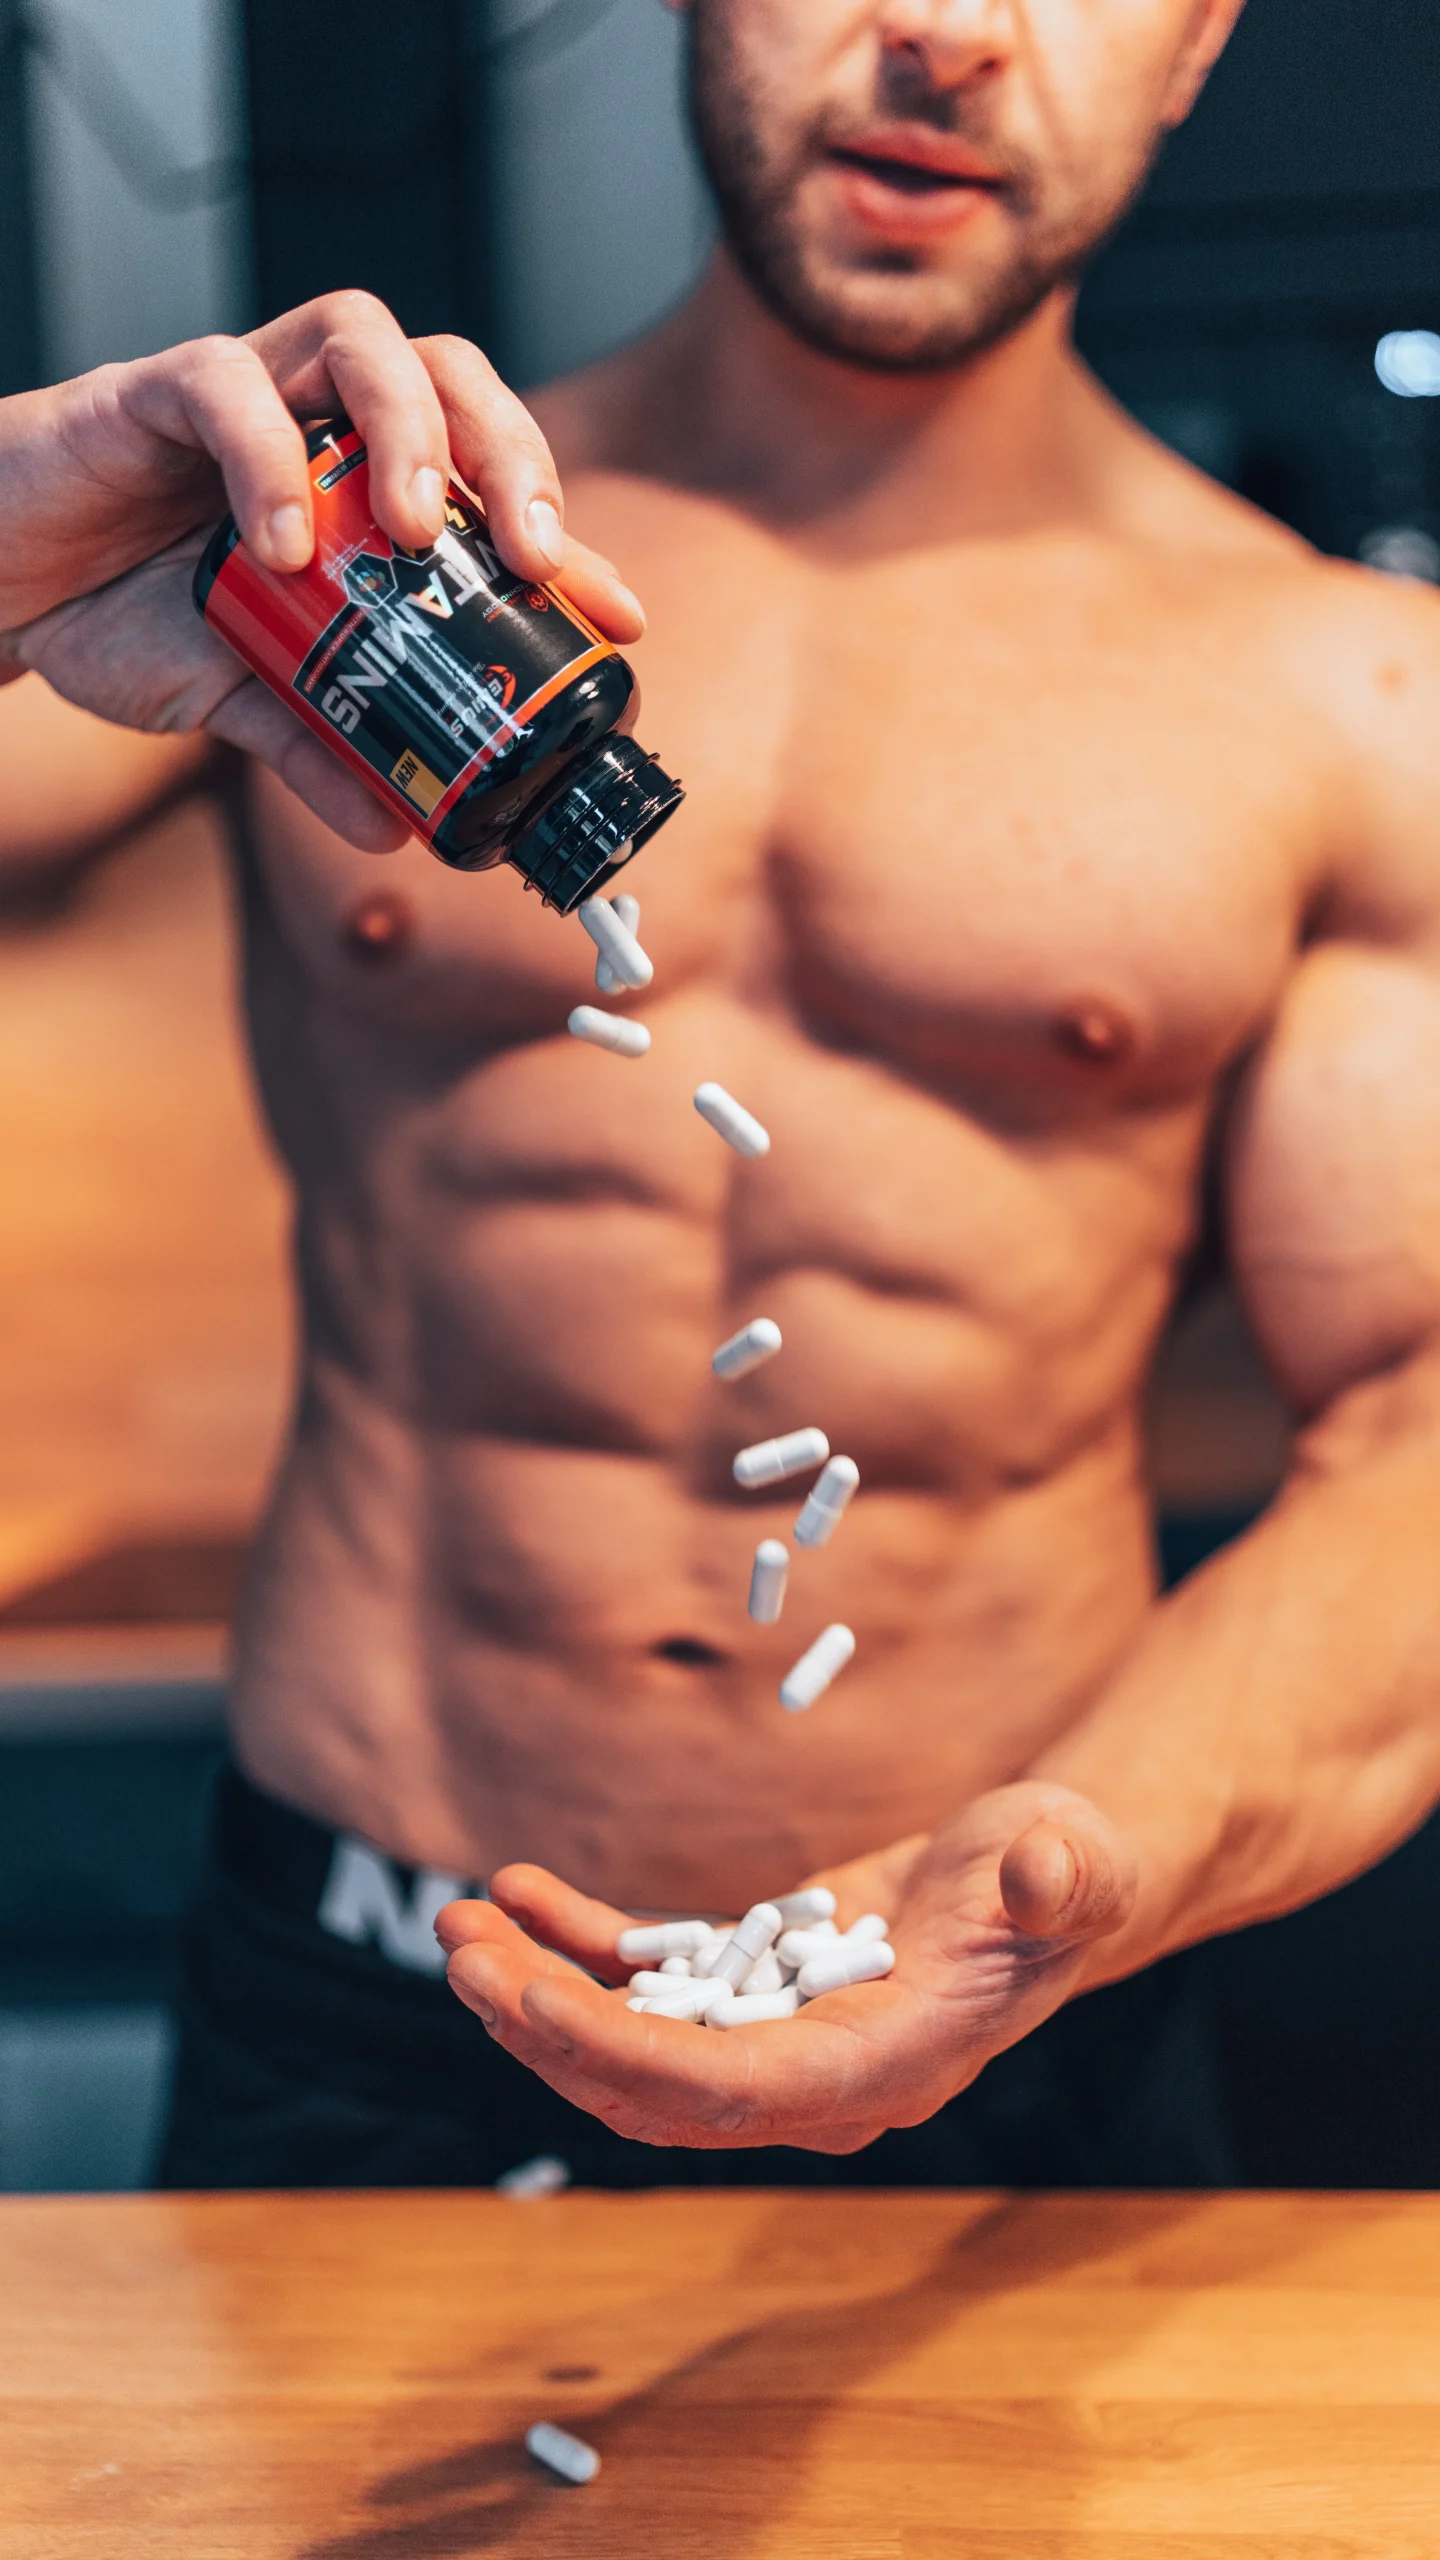 5 Science-Backed Supplements for Fat Loss